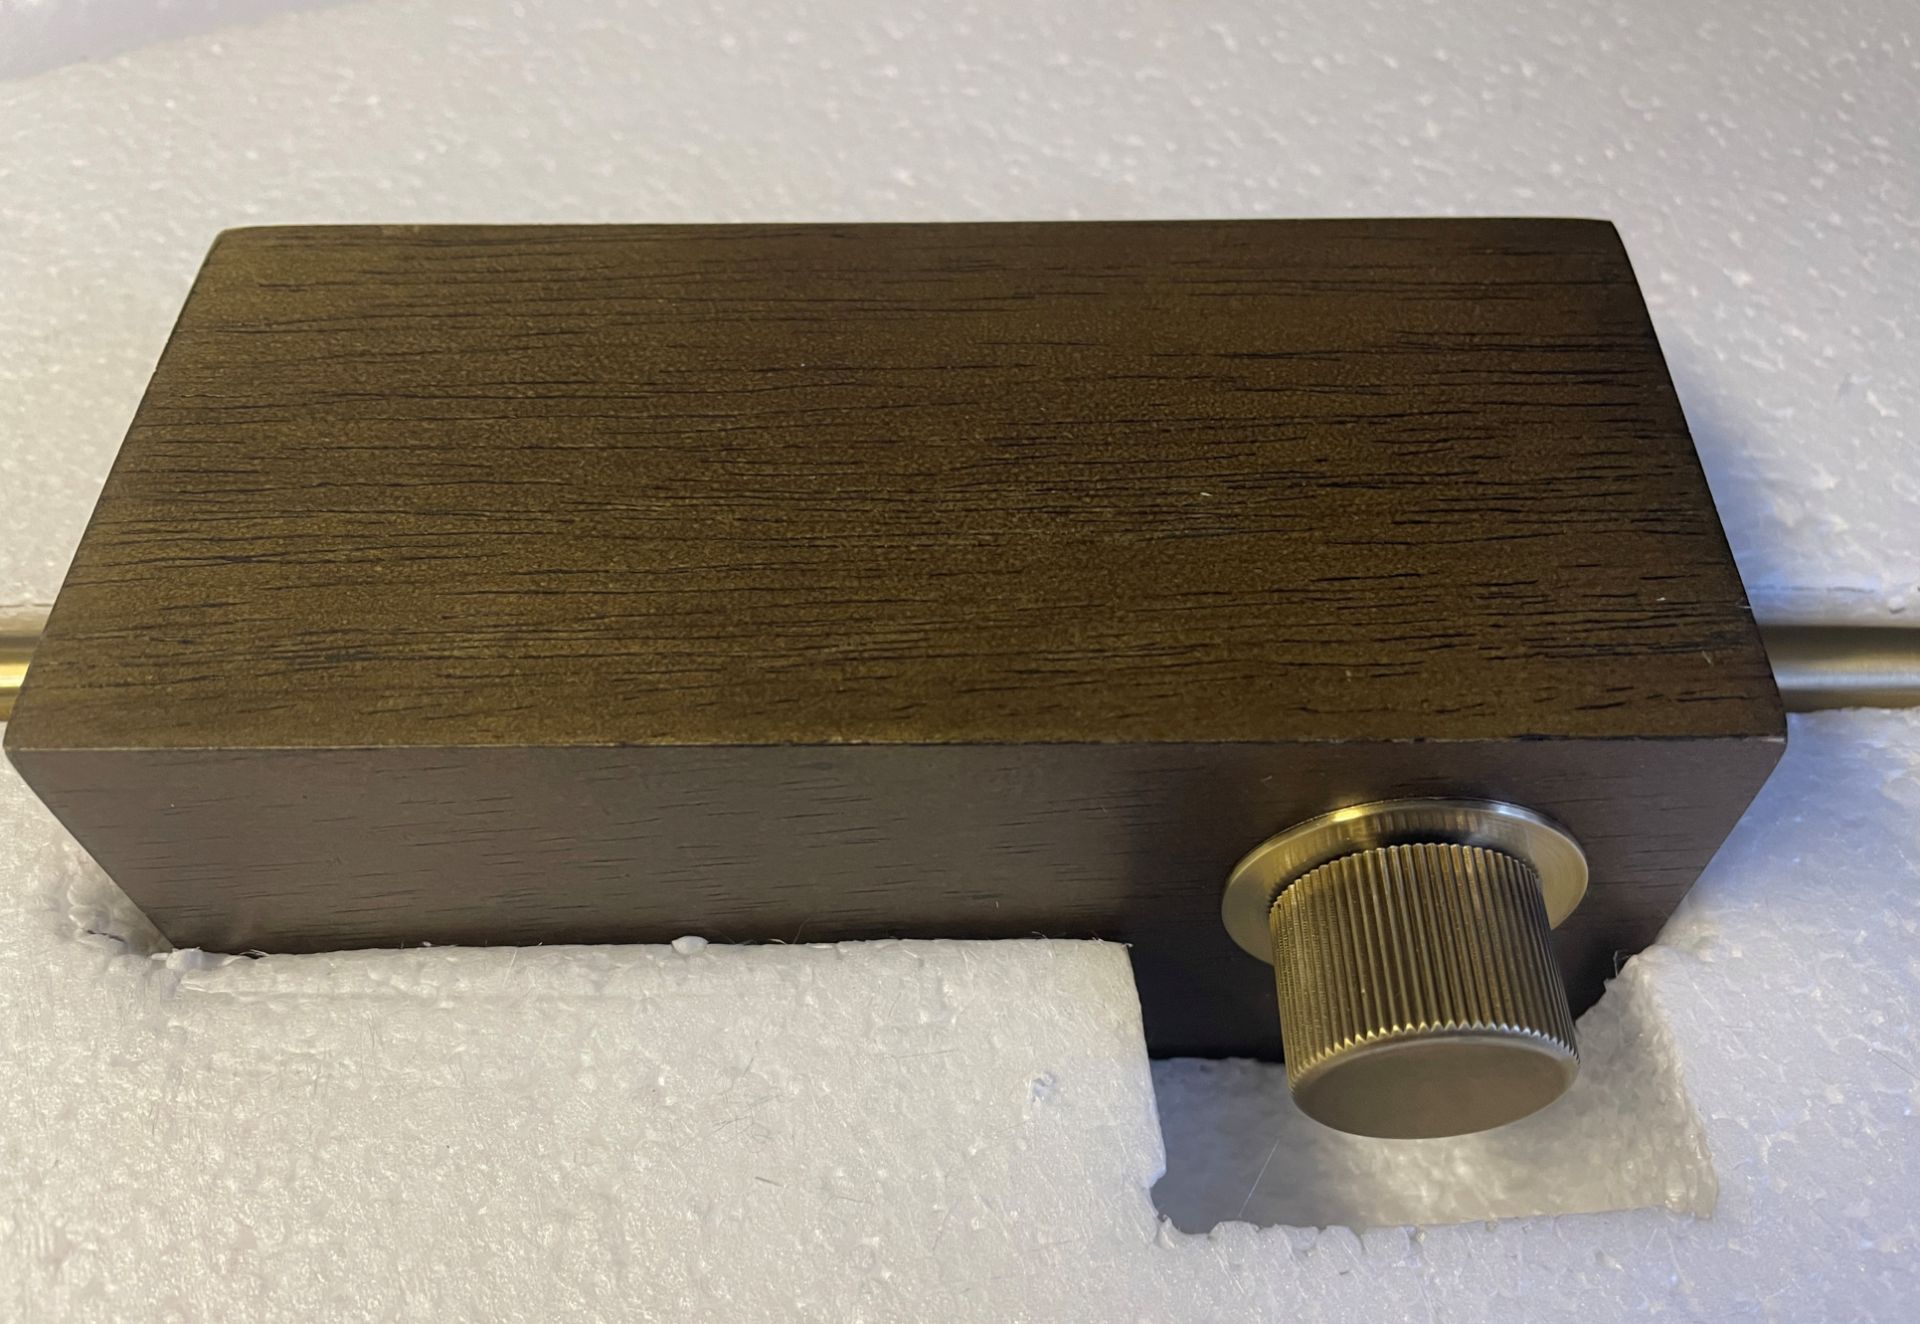 1 x Chelsom Brushed Brass and Wood Adjustable Wall Light Height 75cm - designed exclusively for one - Image 9 of 12